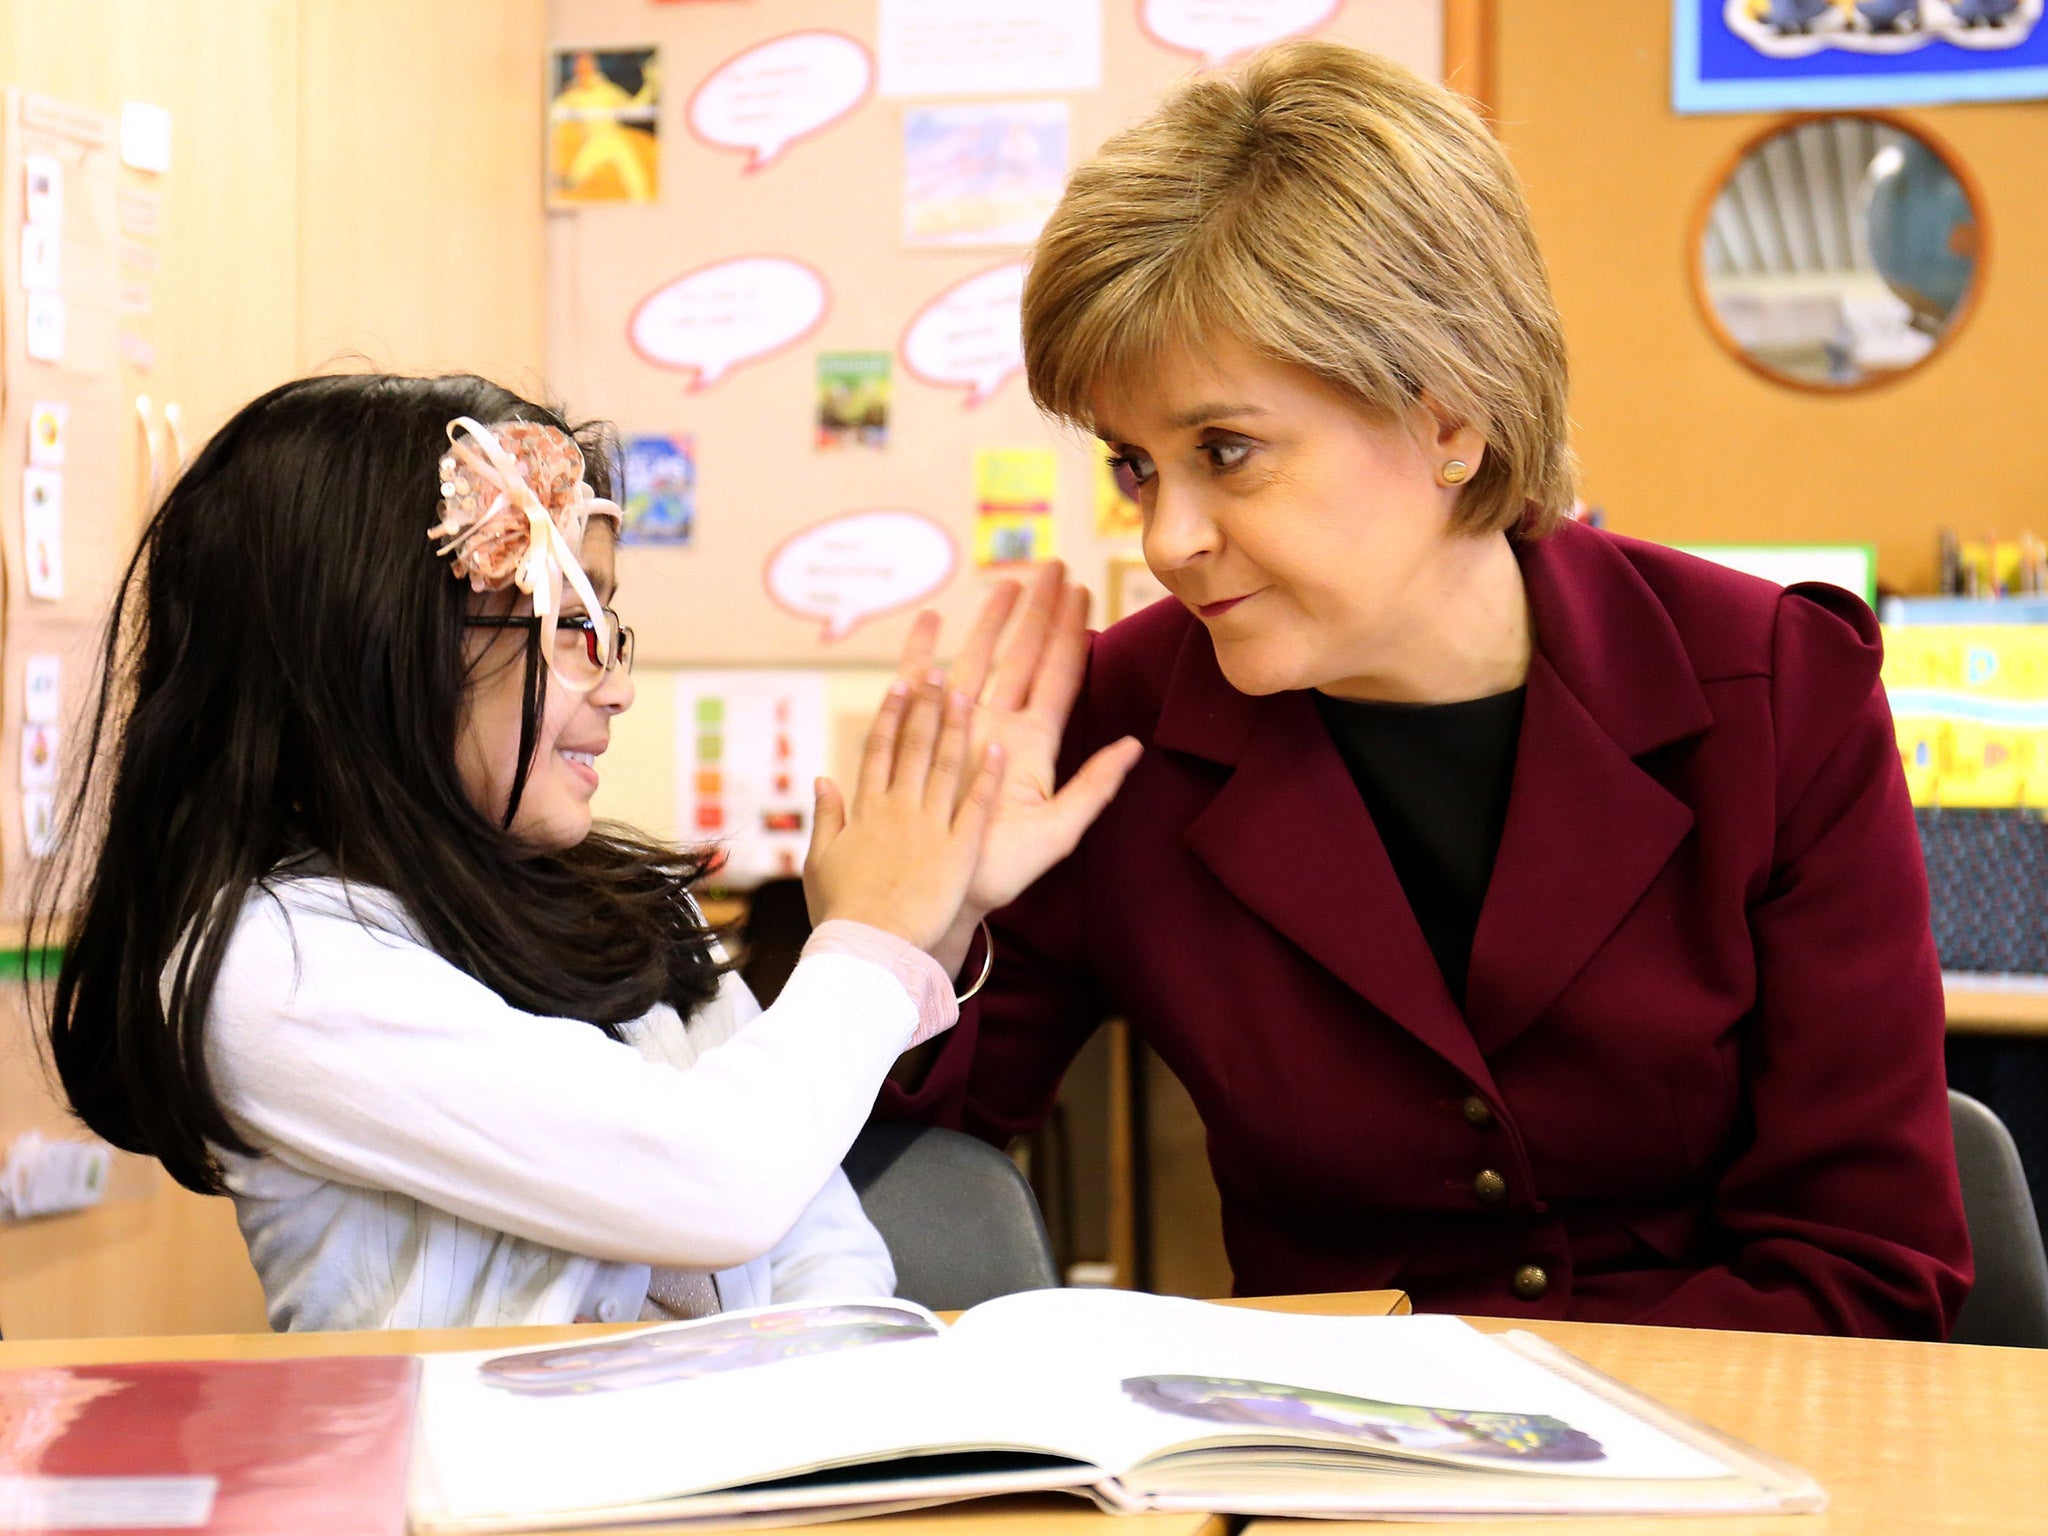 The SNP leader visiting a primary school earlier this year